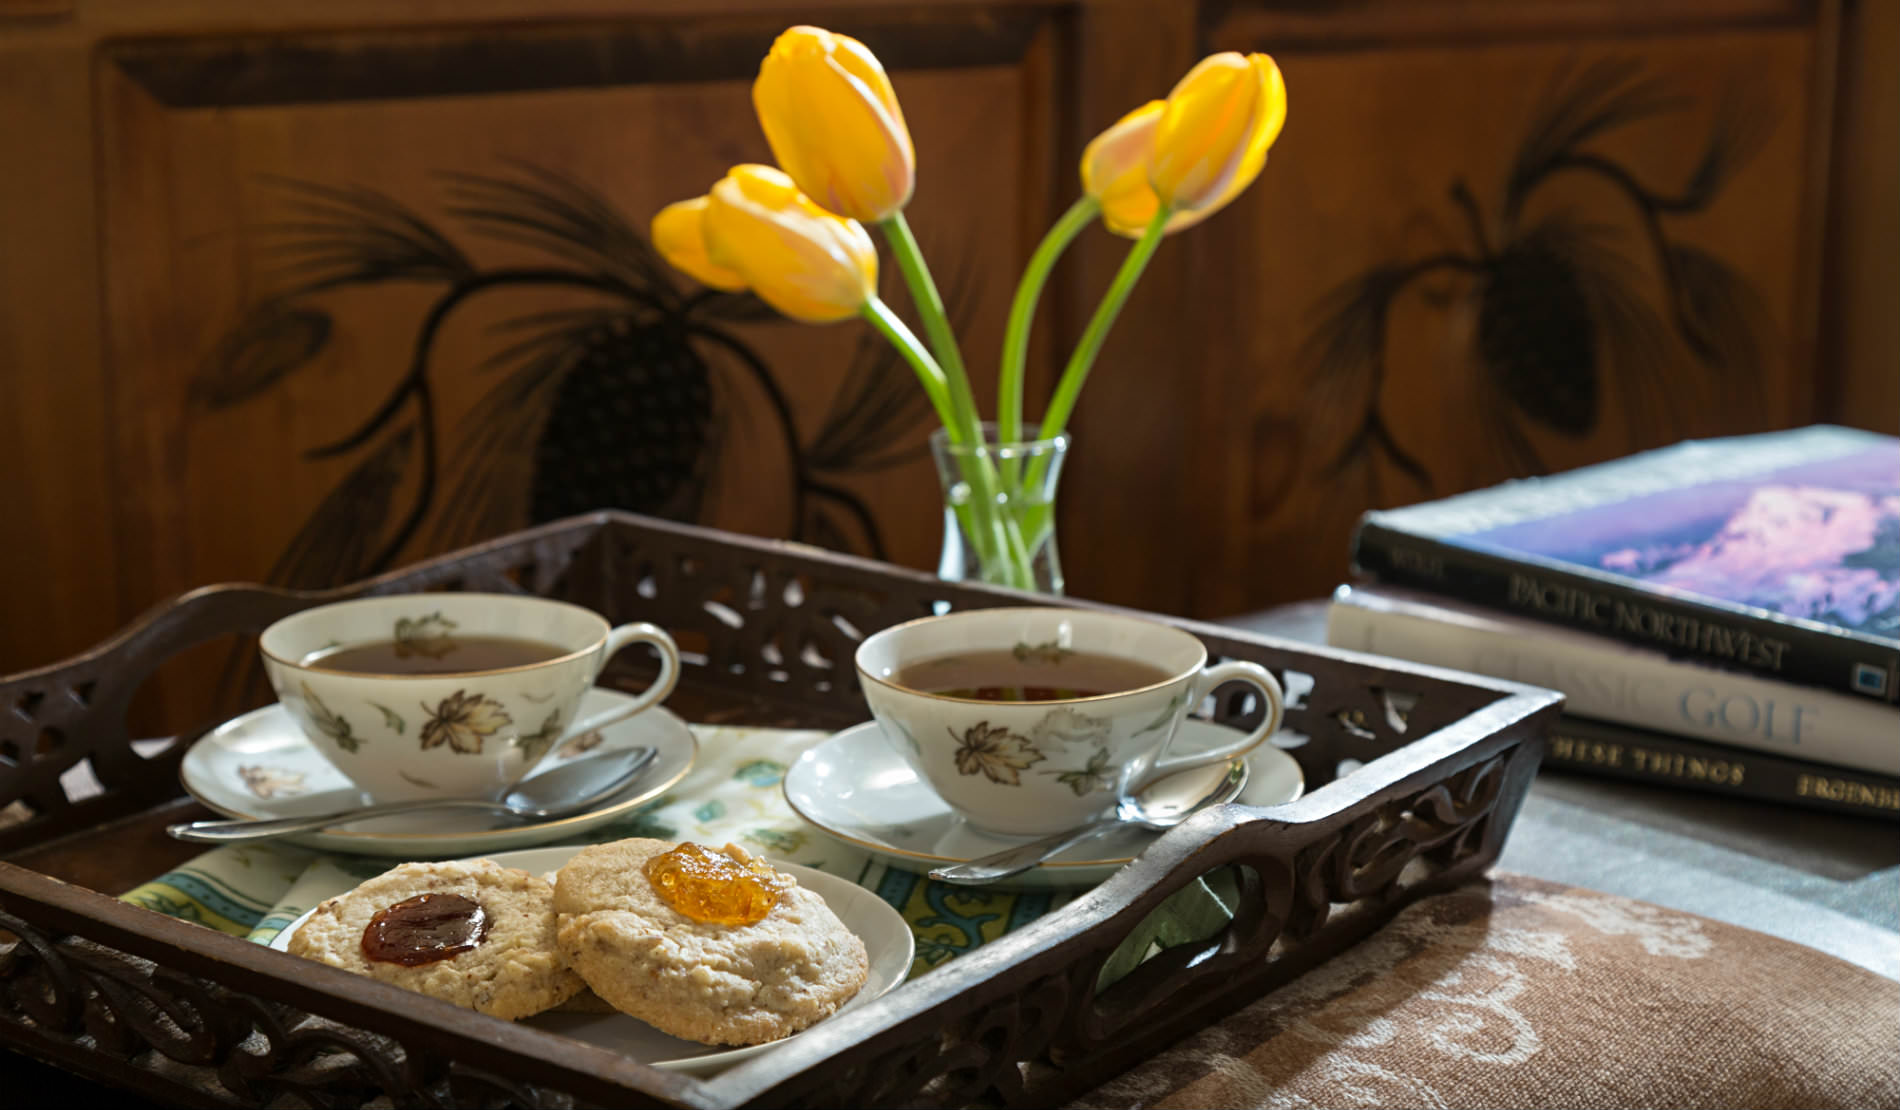 Cookies and tea on wooden server with yellow tulips and stack of books.